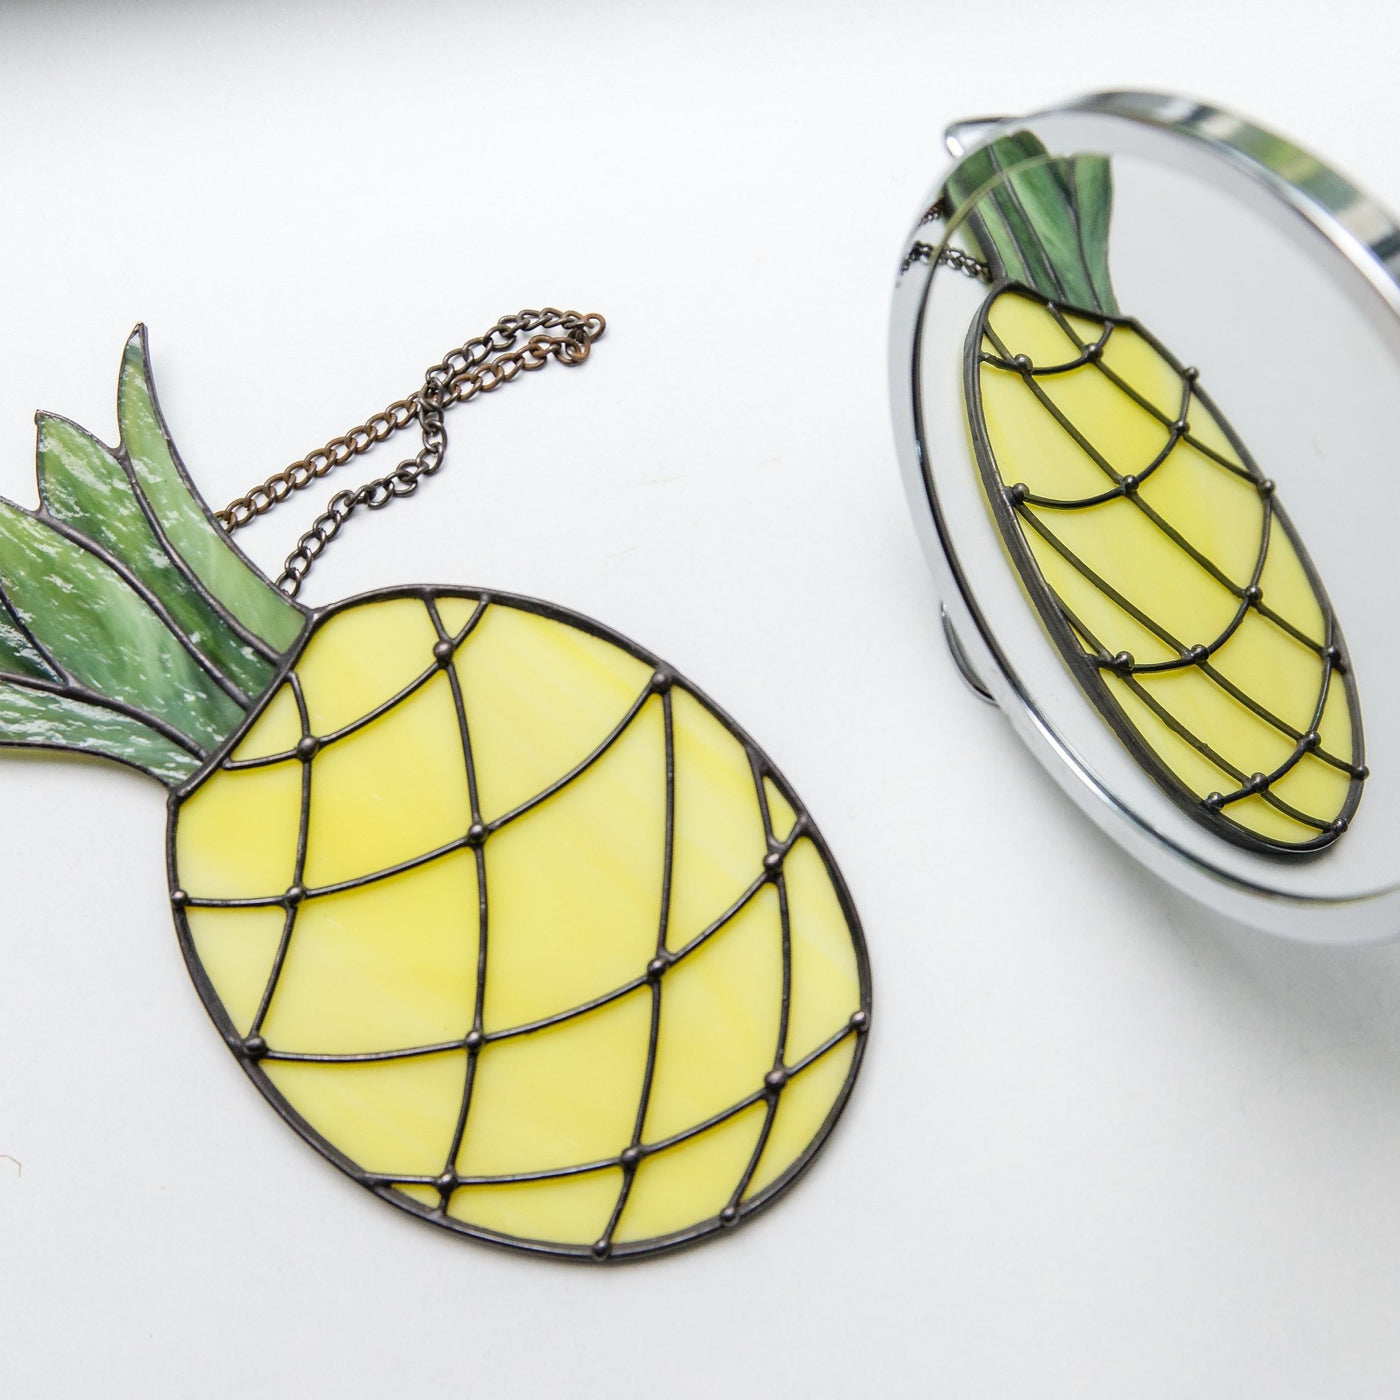 Window hanging of a stained glass pineapple for home decoration